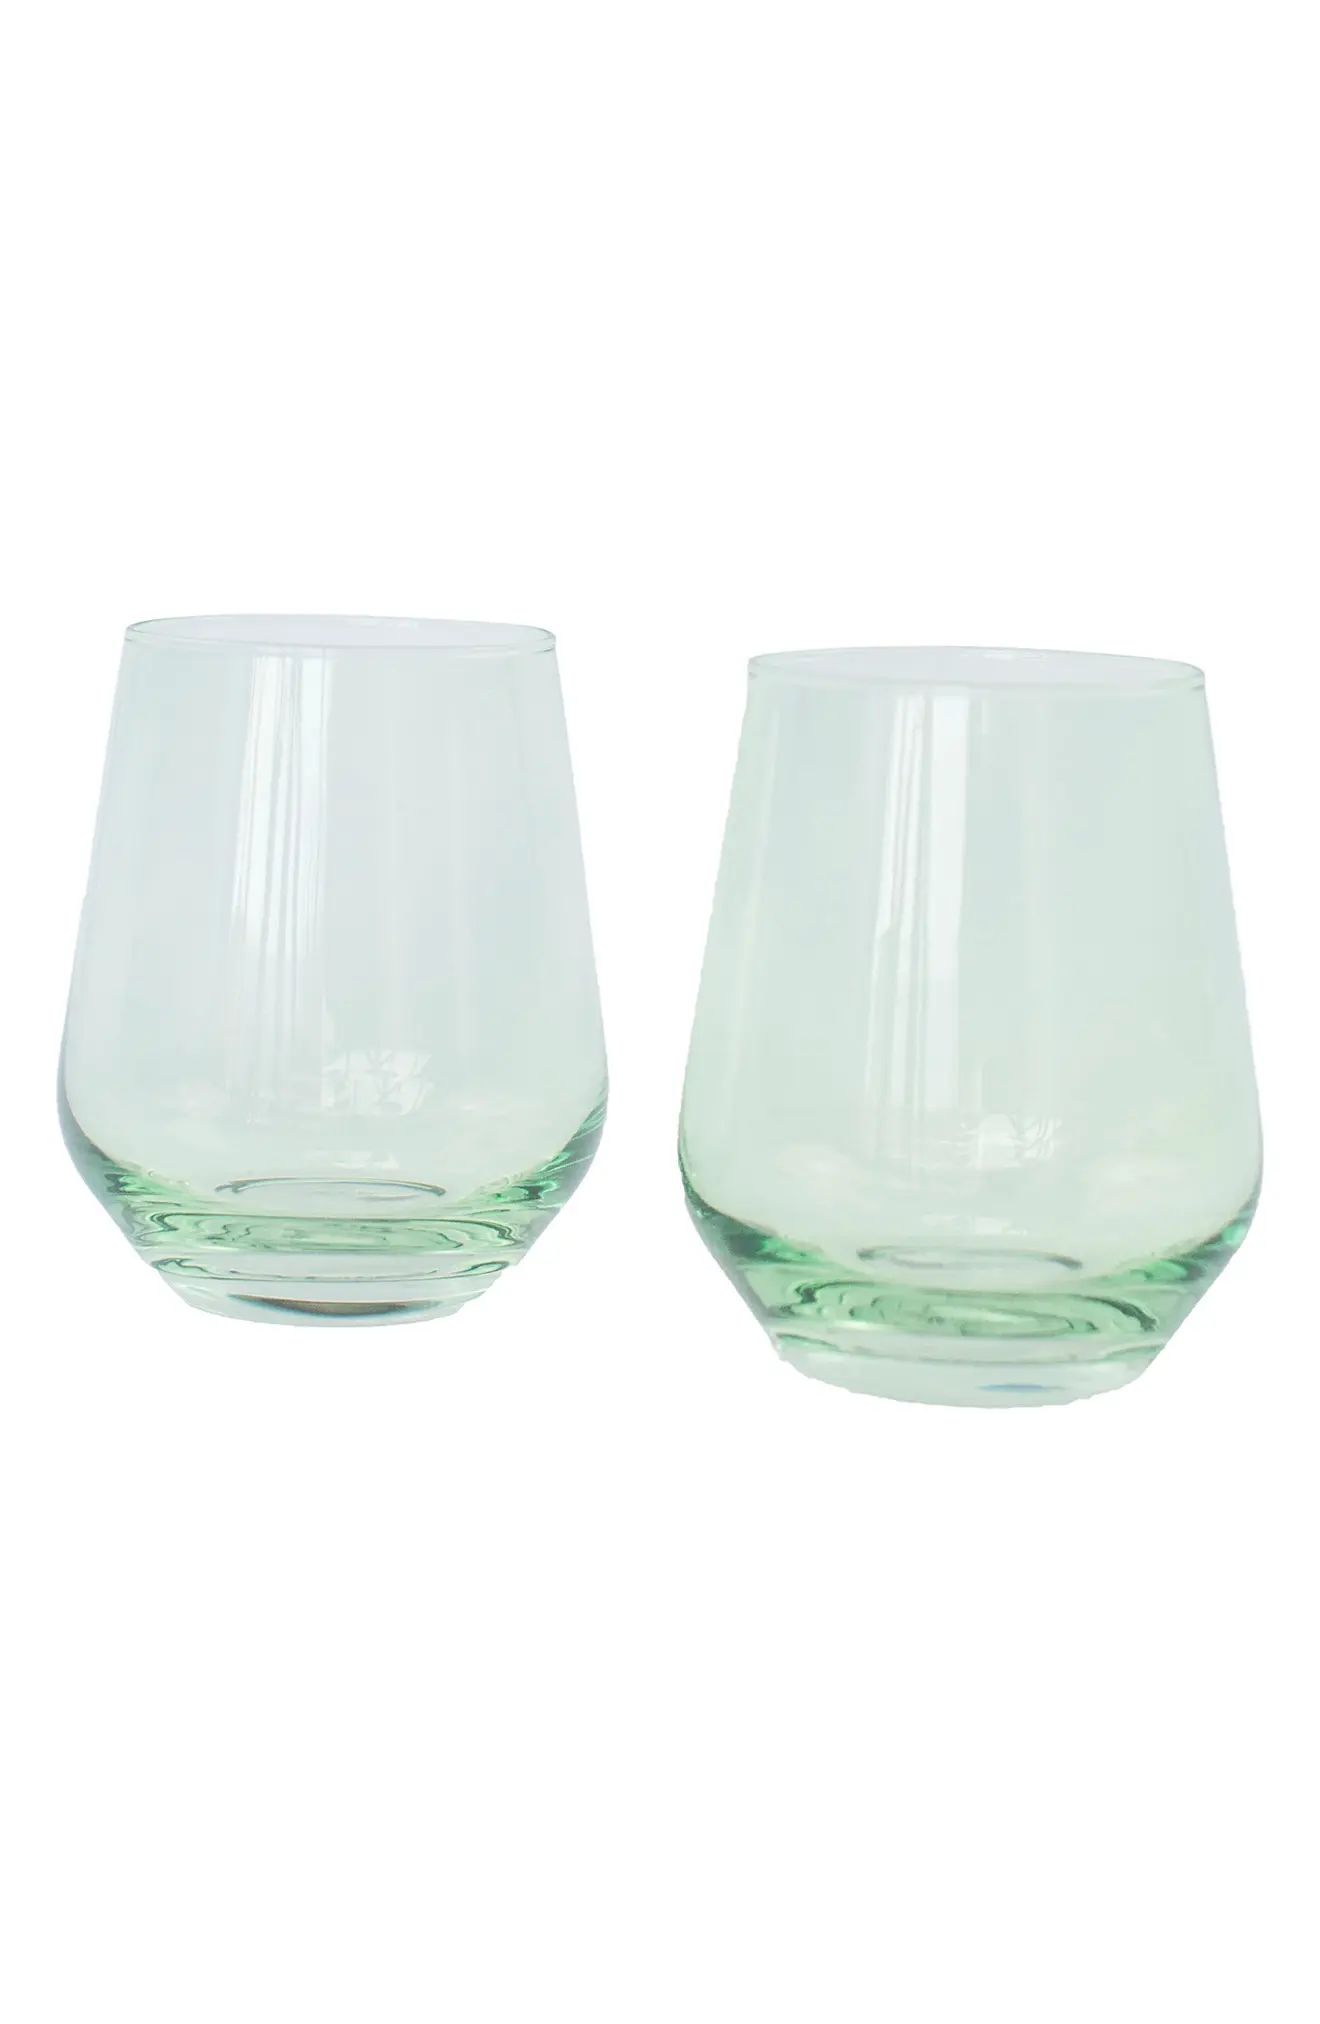 Estelle Colored Glass Set of 2 Stemless Wineglasses in Mint Green at Nordstrom | Nordstrom